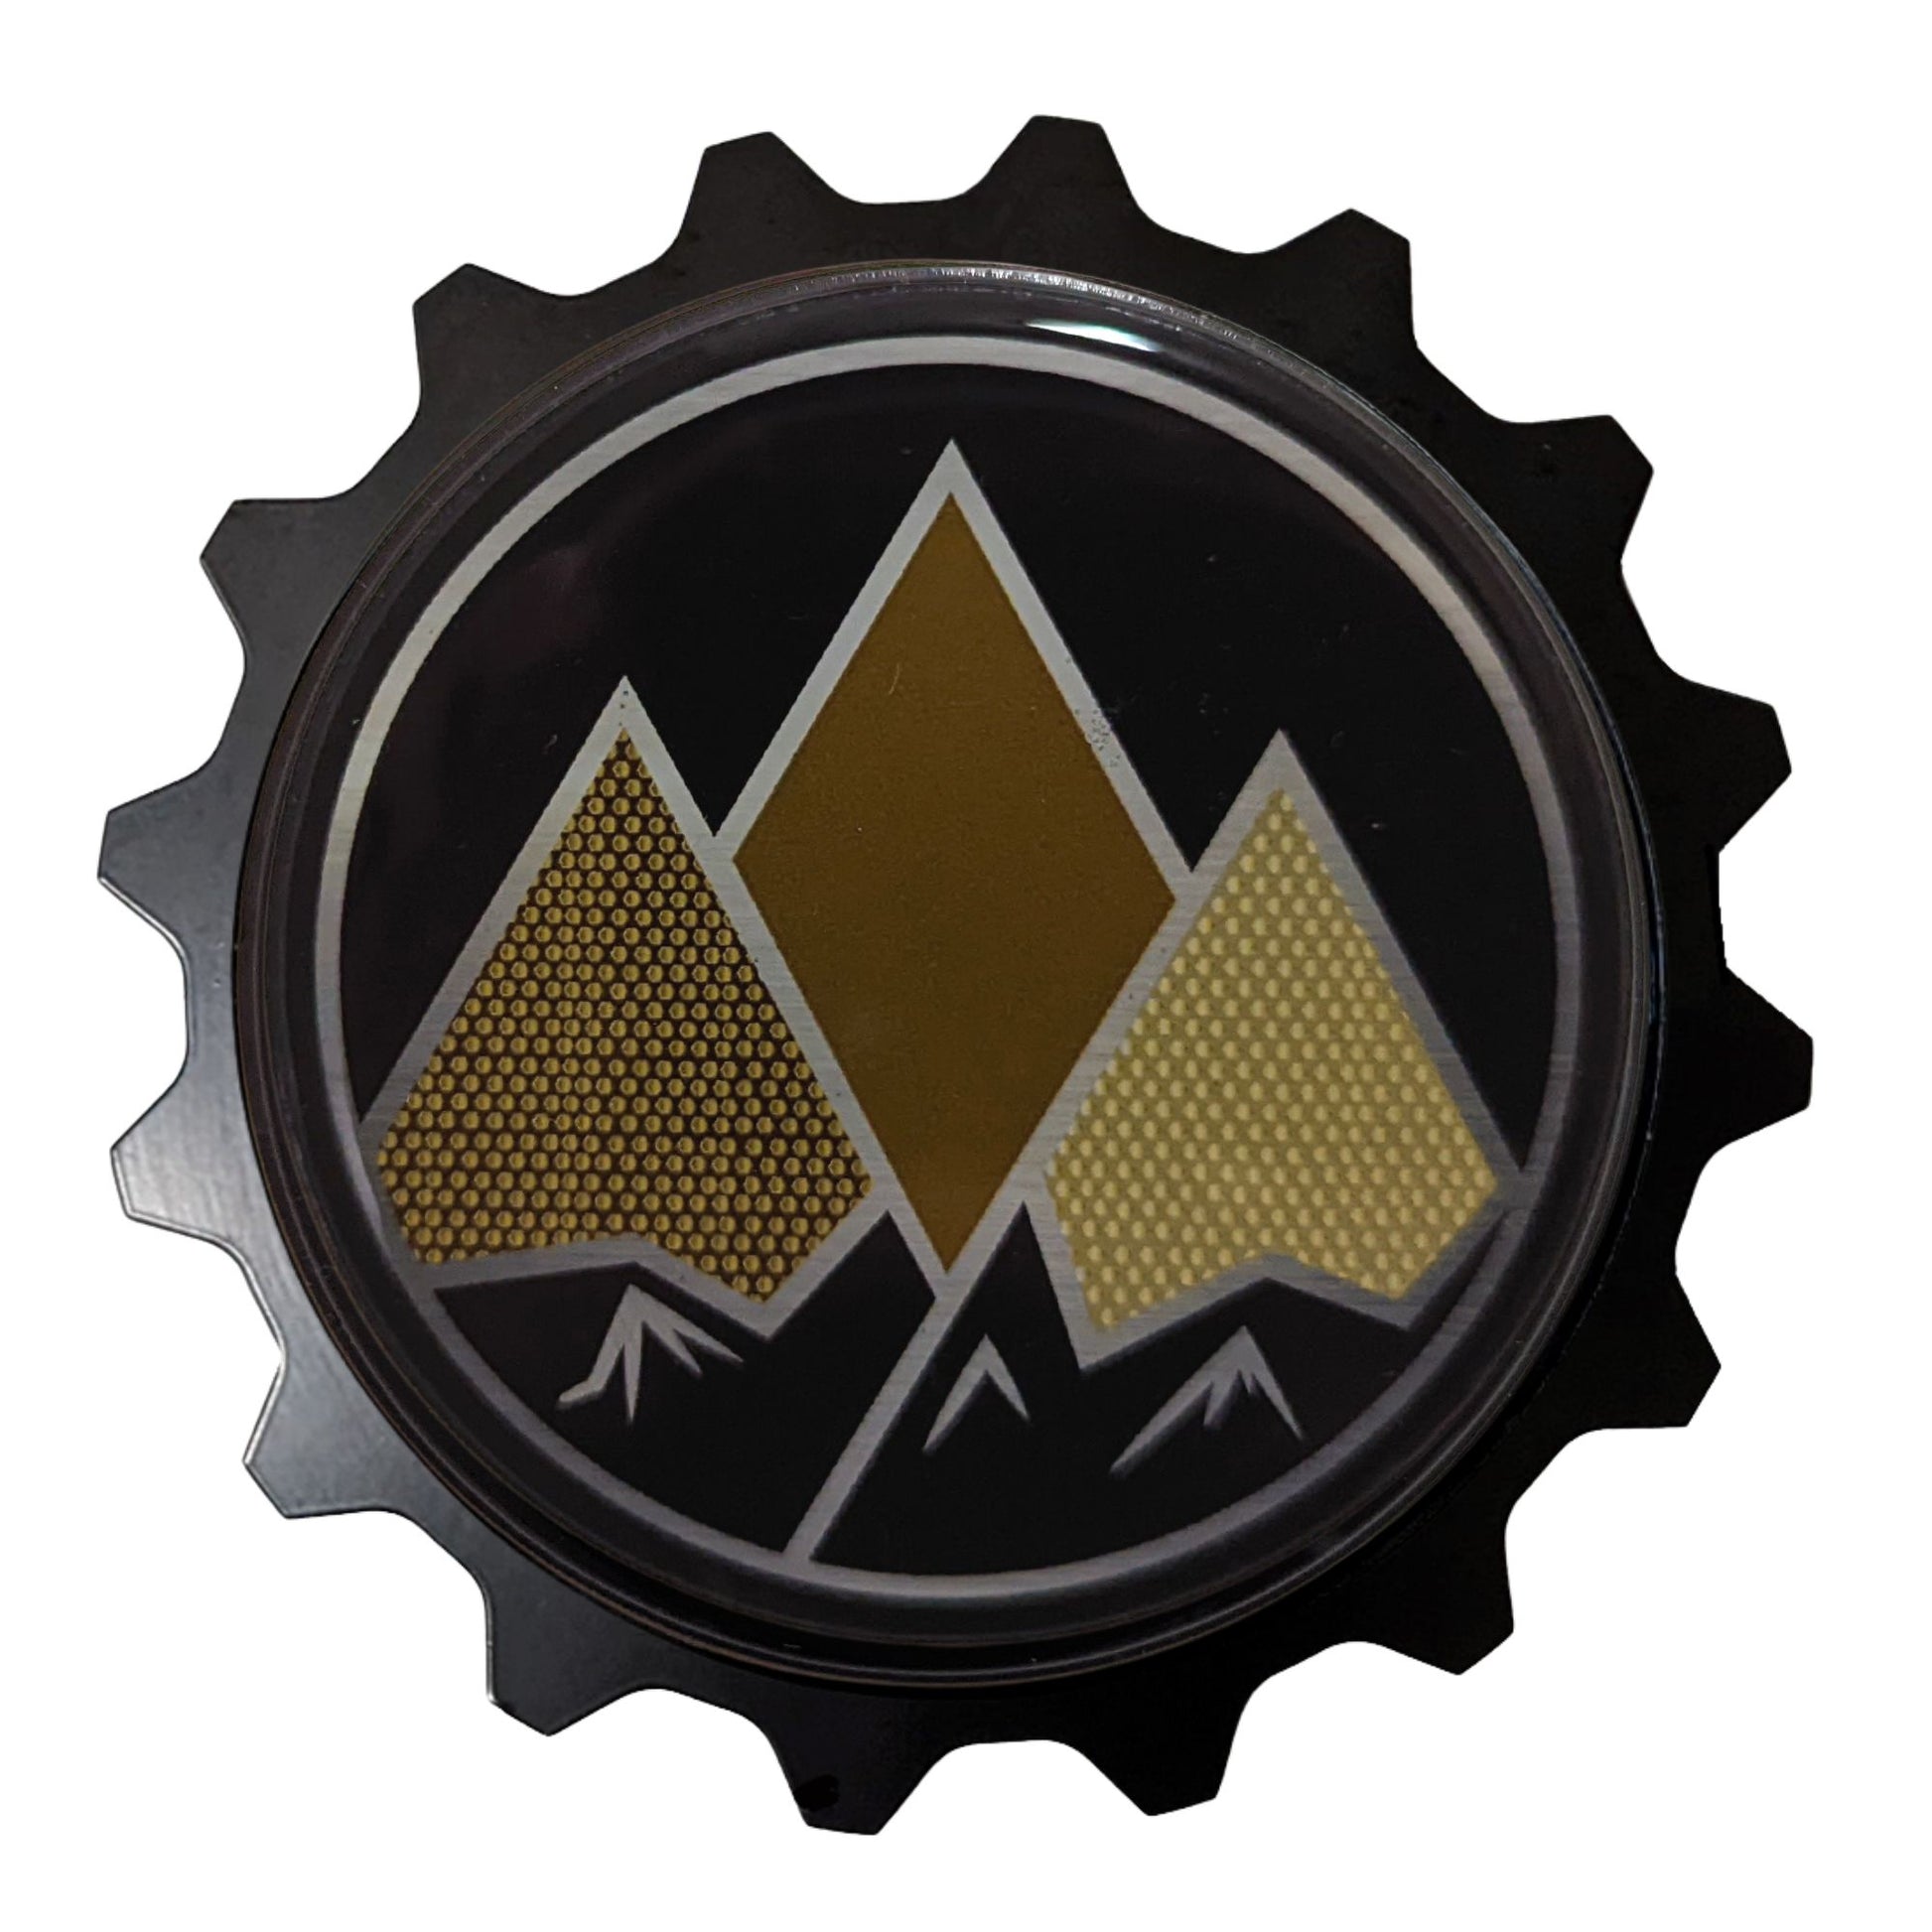 Visit www.thegrillebadgestore.com Huge Collection of Badges! Mountain, Stripe, Retro, Pop Culture & More Standard Grille Badge Mountain Style (Not Acrylic) Aluminum With Resin Center, Full 1 Year Warranty - Blackout emblems and overlays are popular, but add a splash of color to your grille badge on Tacoma, FJ Cruiser, 4Runner, Tundra, Lexus GX and LX, Landcruiser and Domestics like Ram, Jeep, Ford and Chevy). We have also found Subaru, Nissan Frontier and Titan owners love our grille badges!